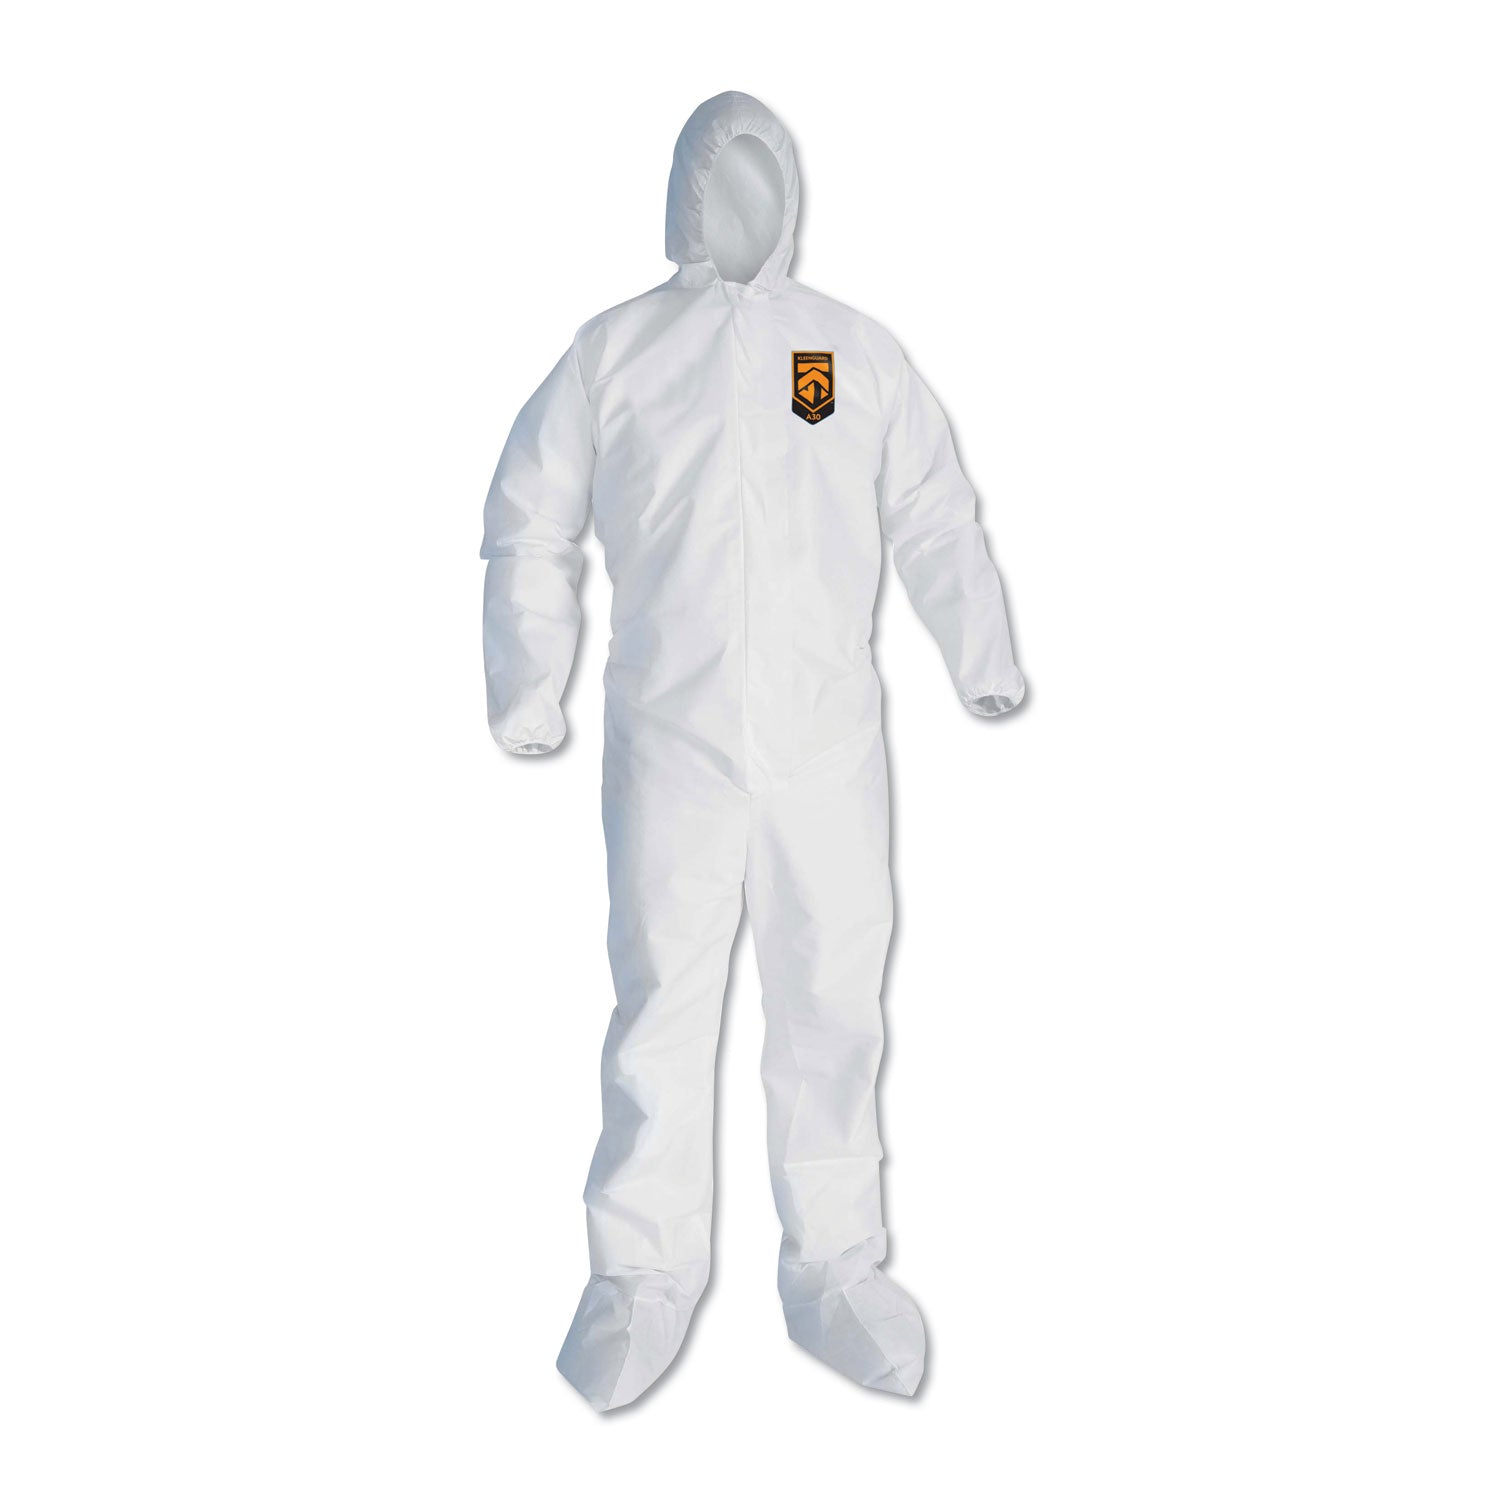 a30-elastic-back-and-cuff-hooded-boots-coveralls-3xl-white-21-carton_kcc46126 - 1